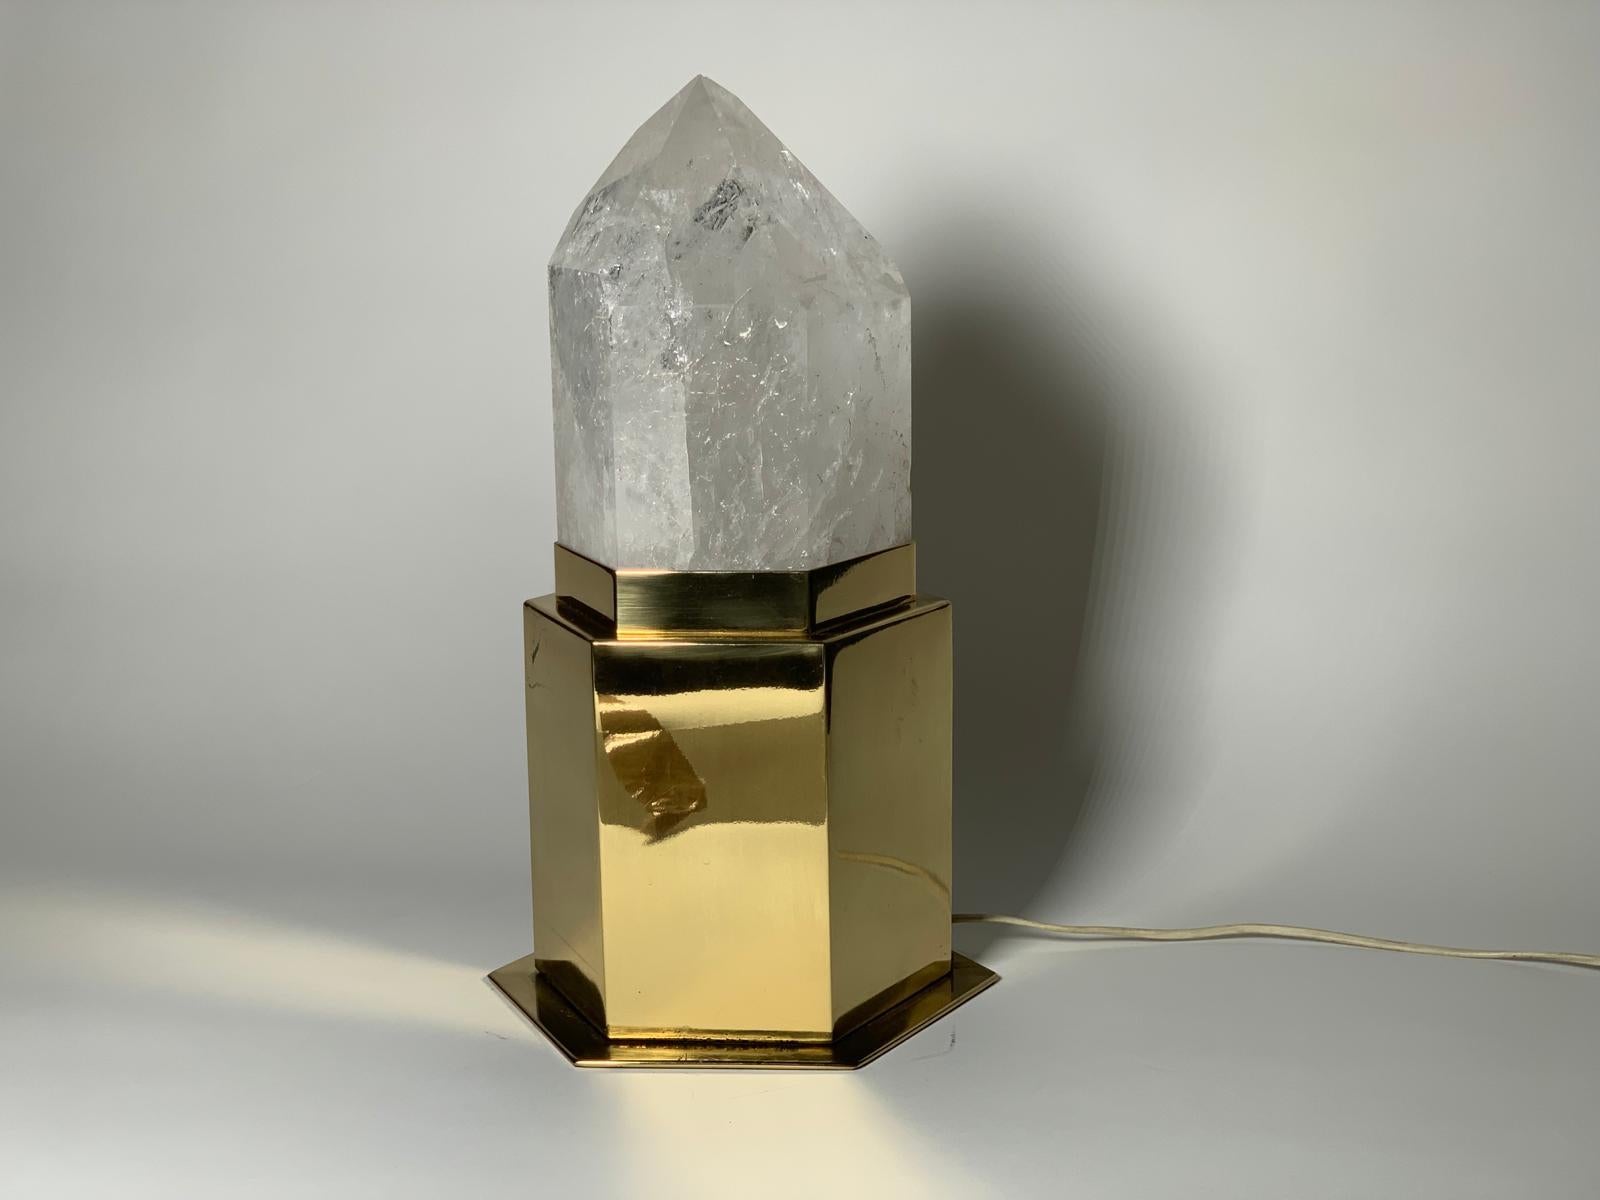 Table lamp with quartz structure and brass base designed by Studio Superego for Superego Editions, in 2015. Unique piece.

Biography
Superego Editions was born in 2006, performing a constant activity of research in decorative arts by offering both